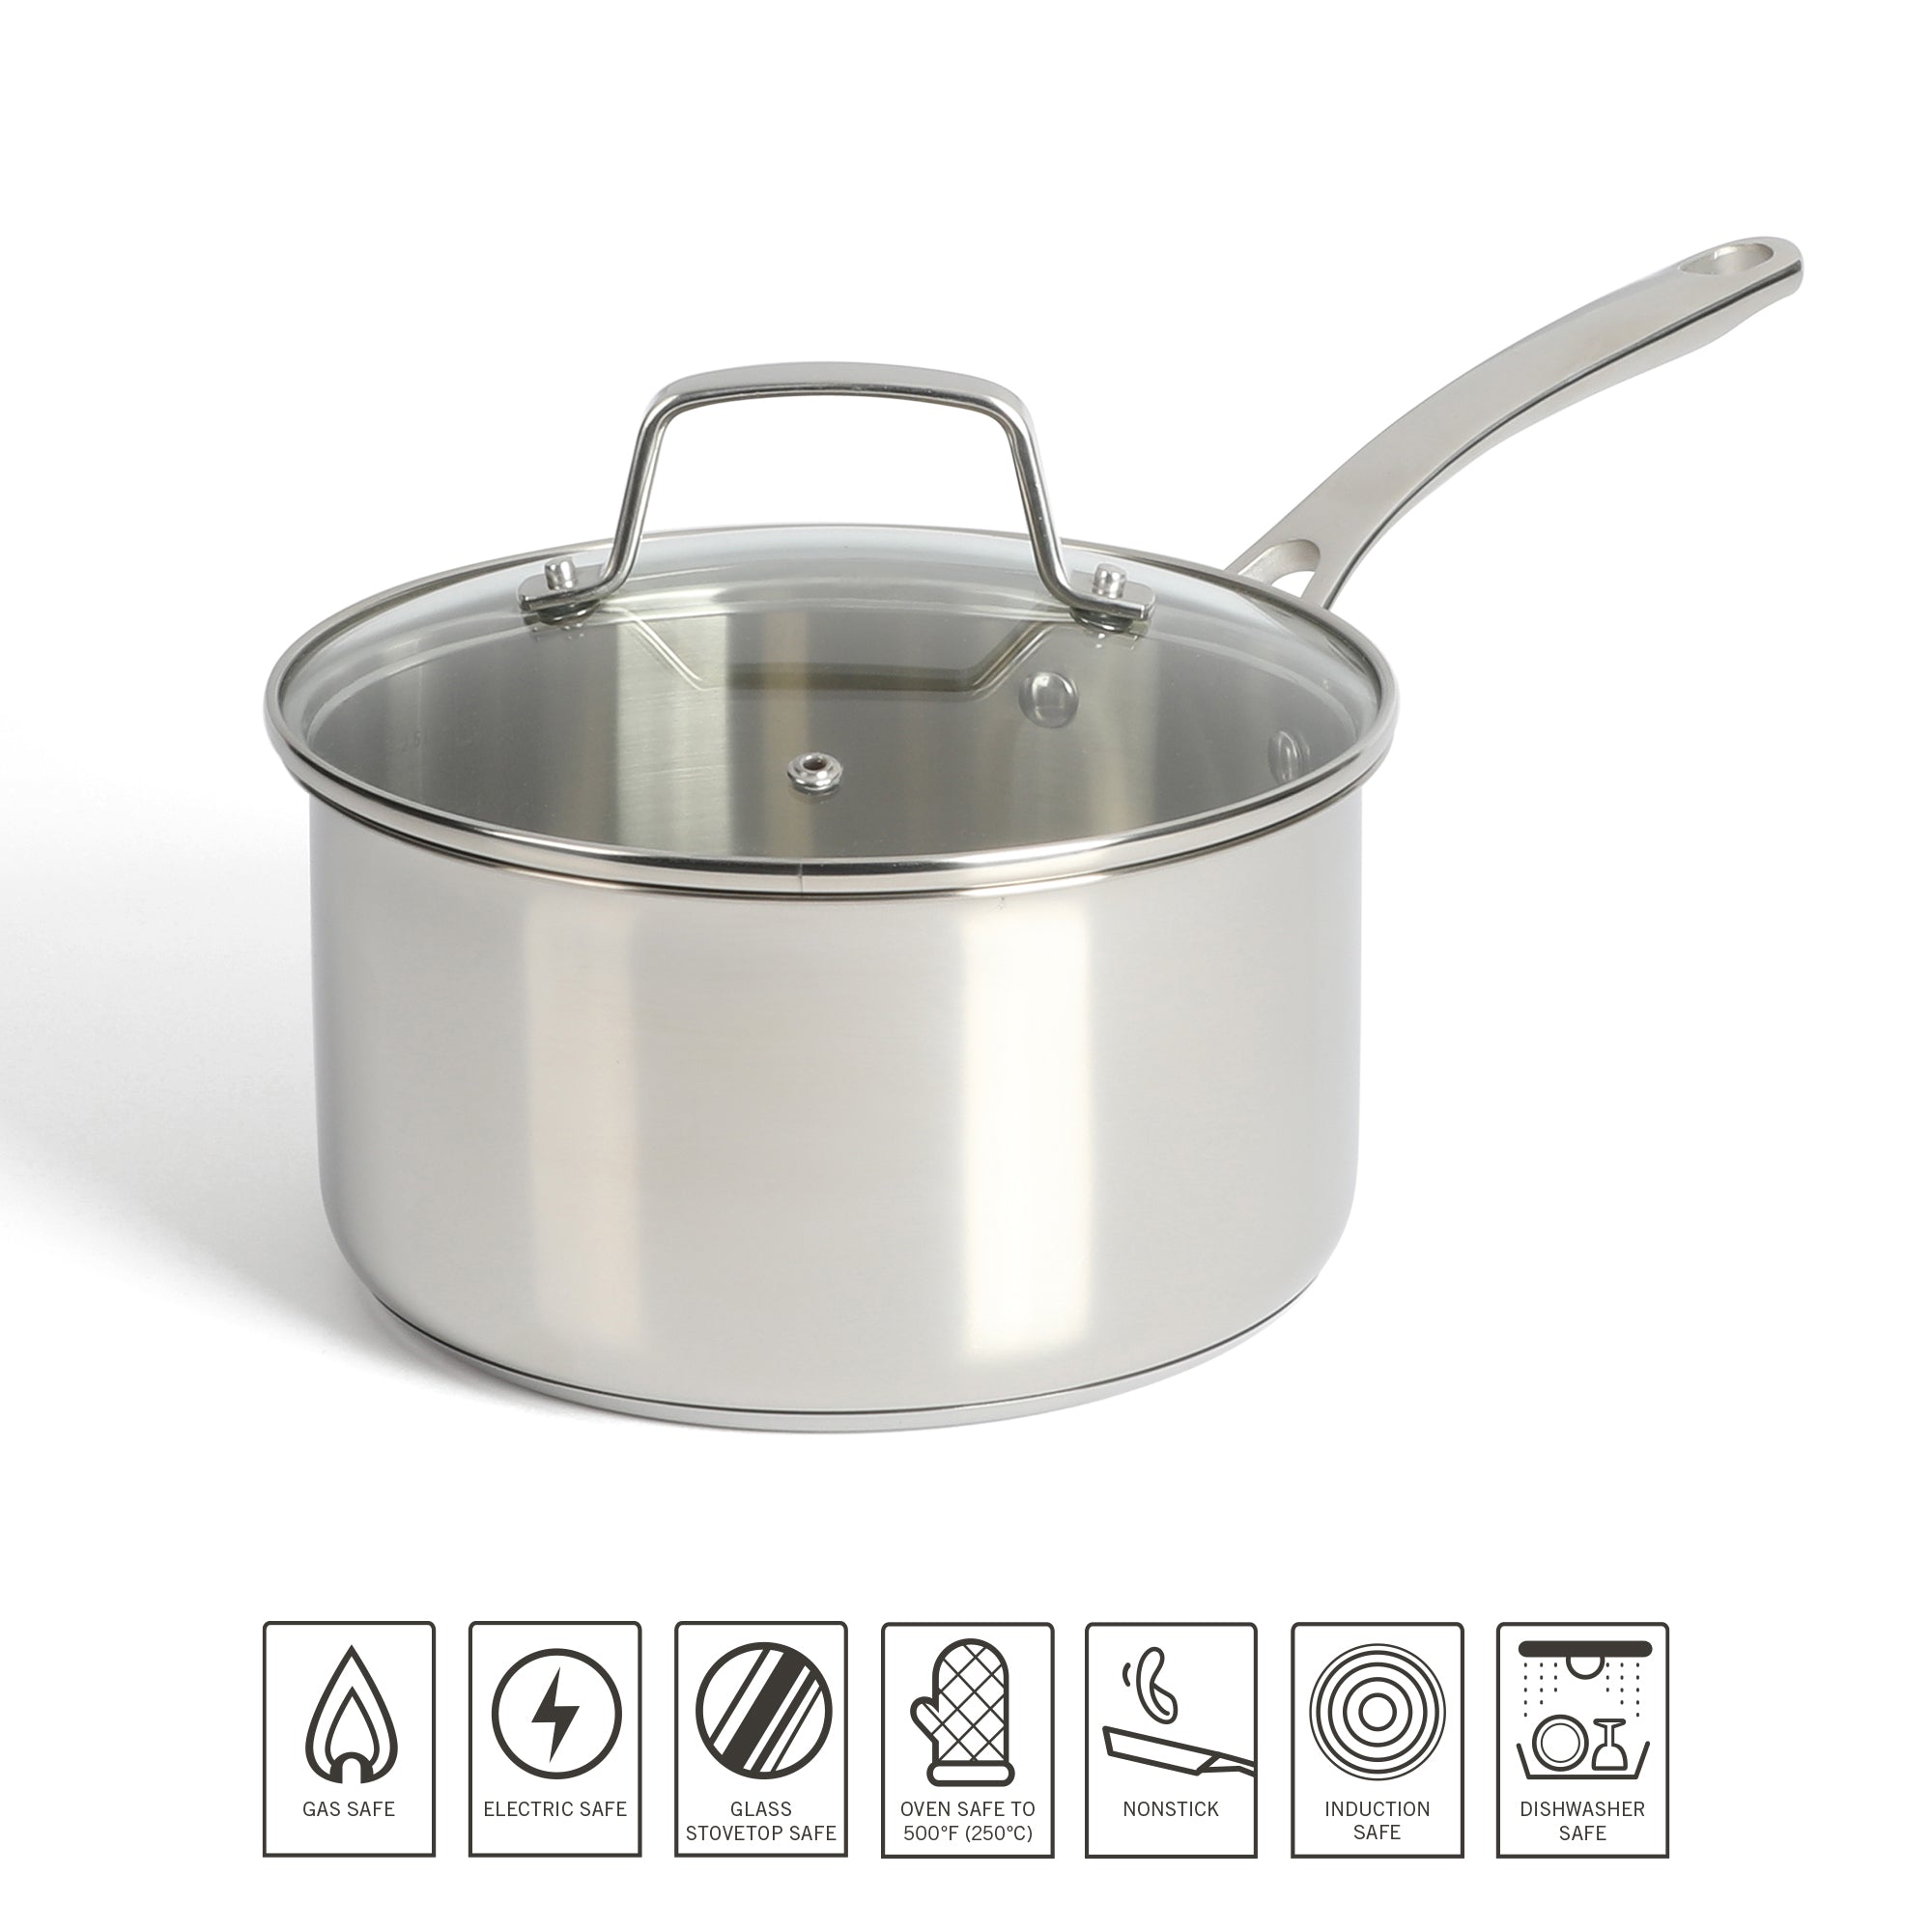 Saucepan with Lid, 18/10 Stainless Steel Nonstick Small Sauce Pan